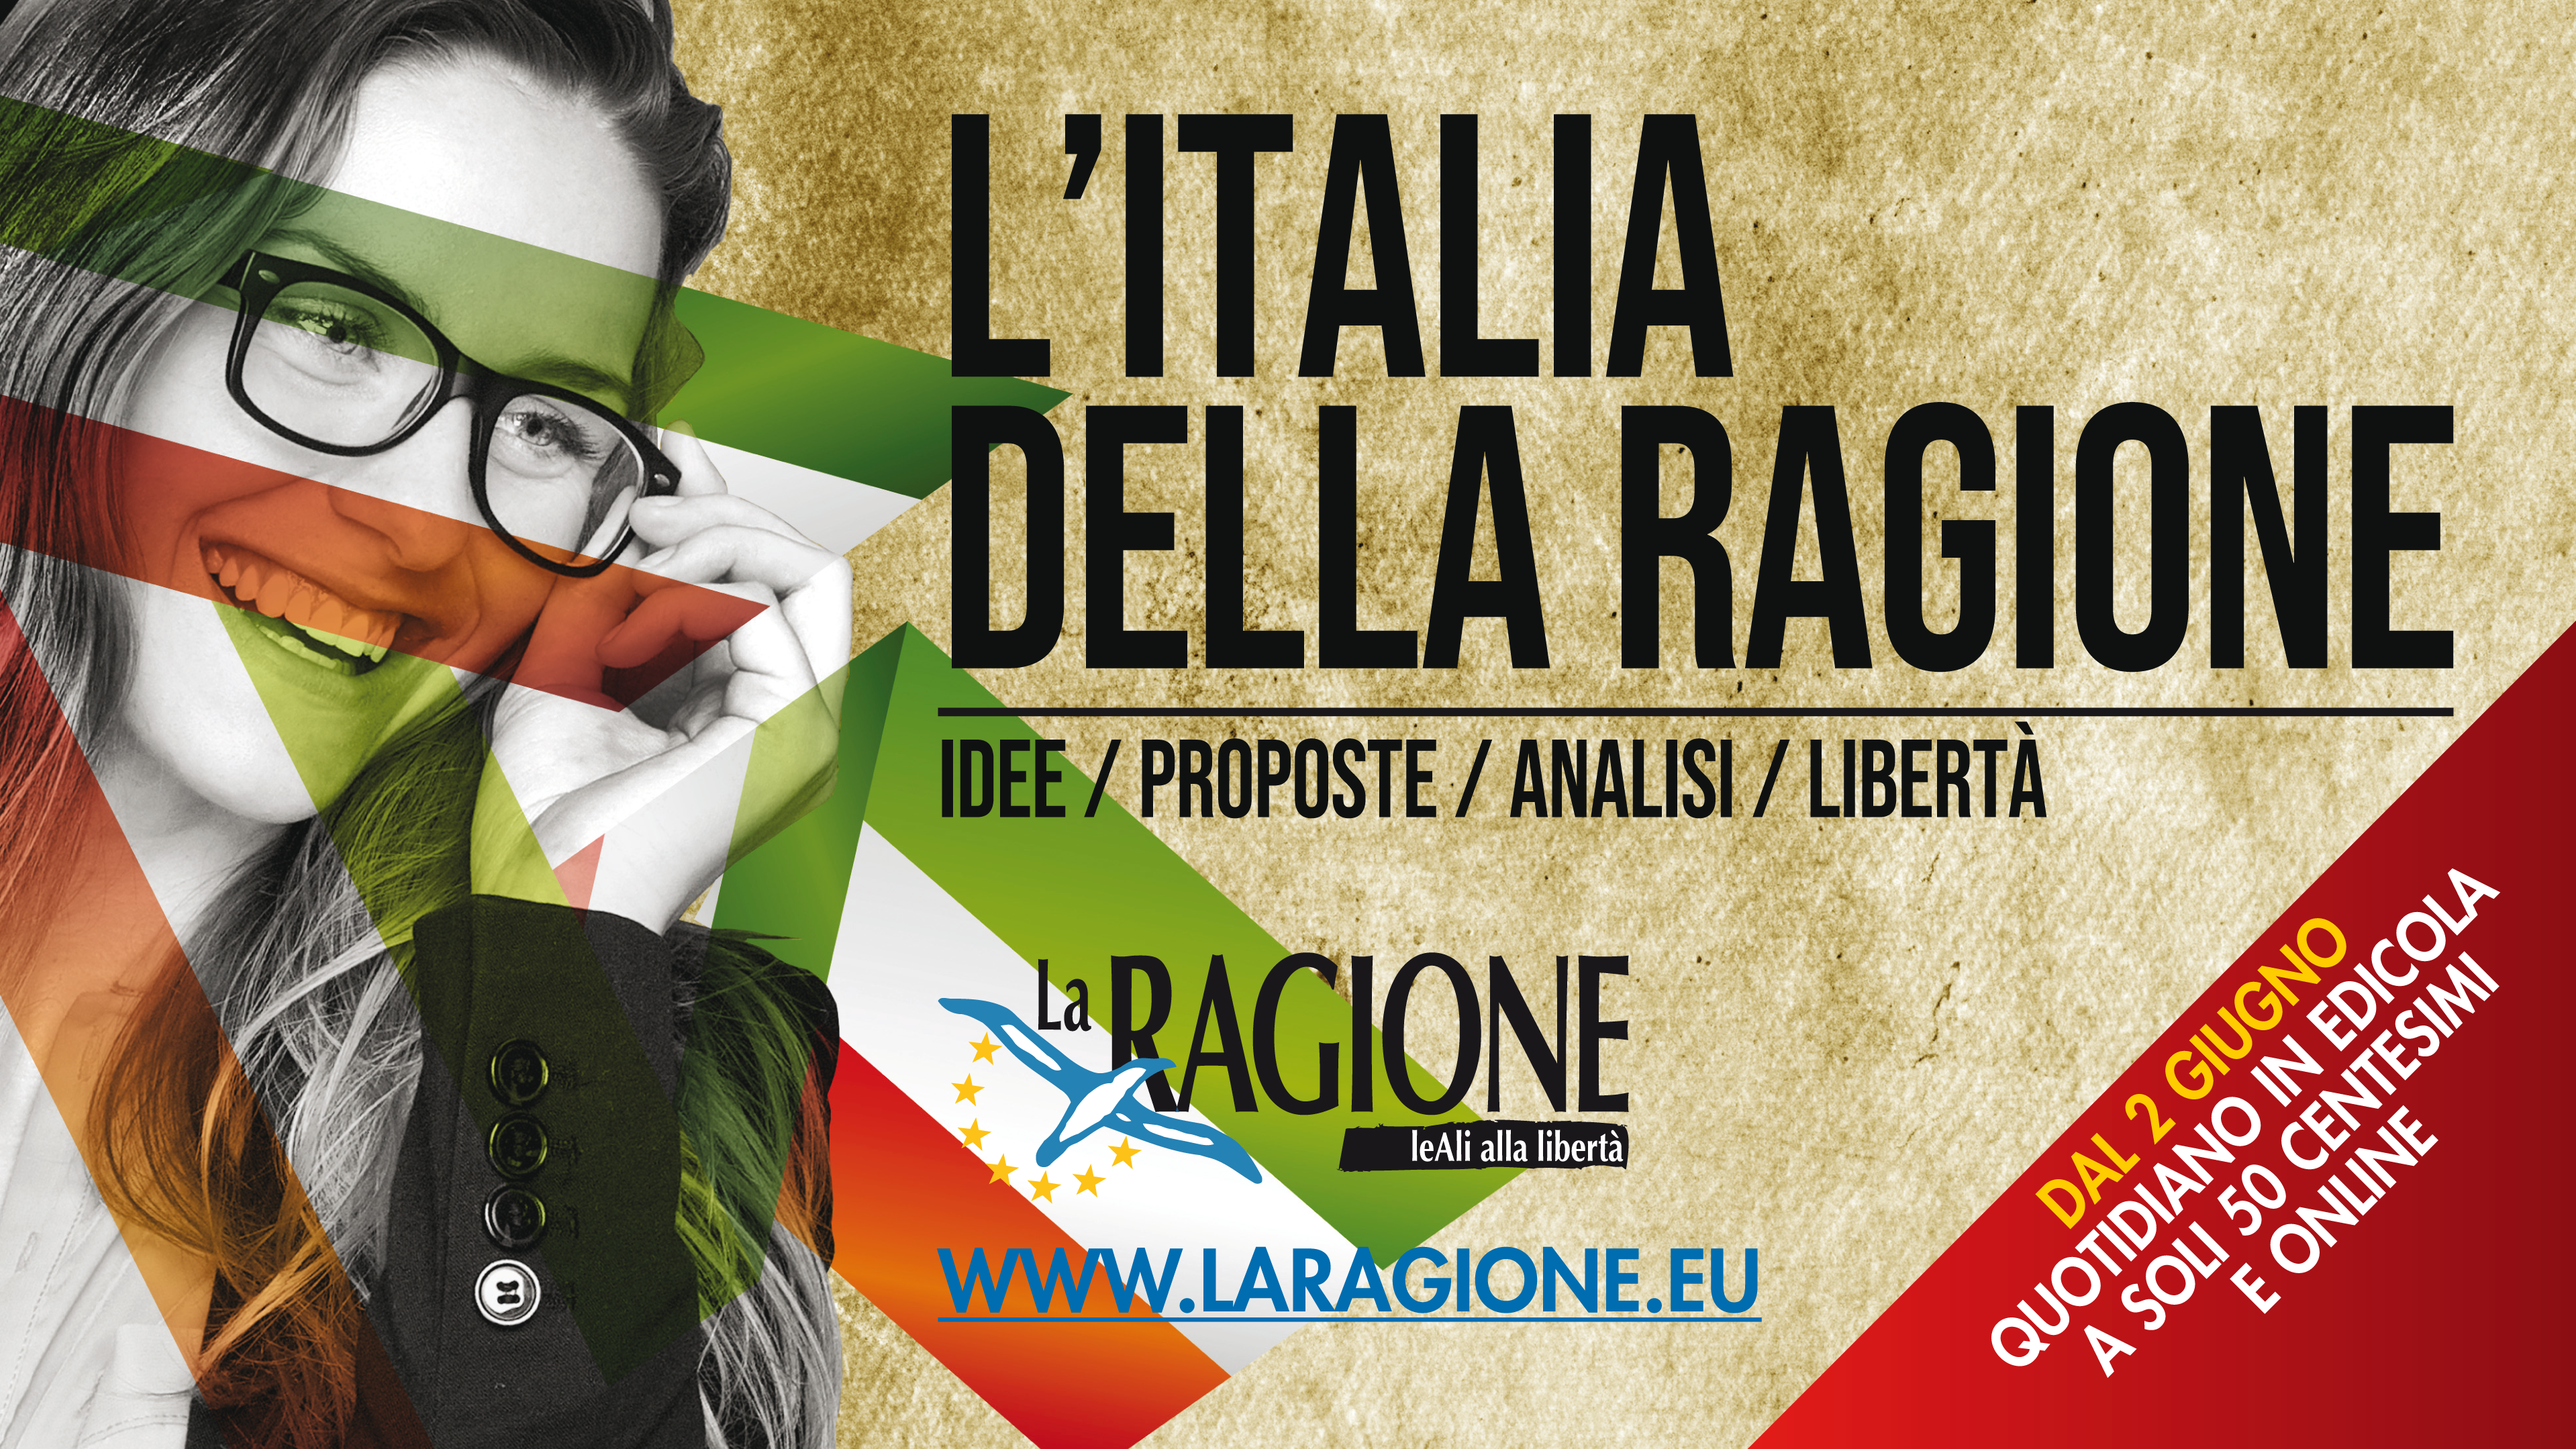 Presentation of the new daily newspaper “La Ragione” on June 2nd